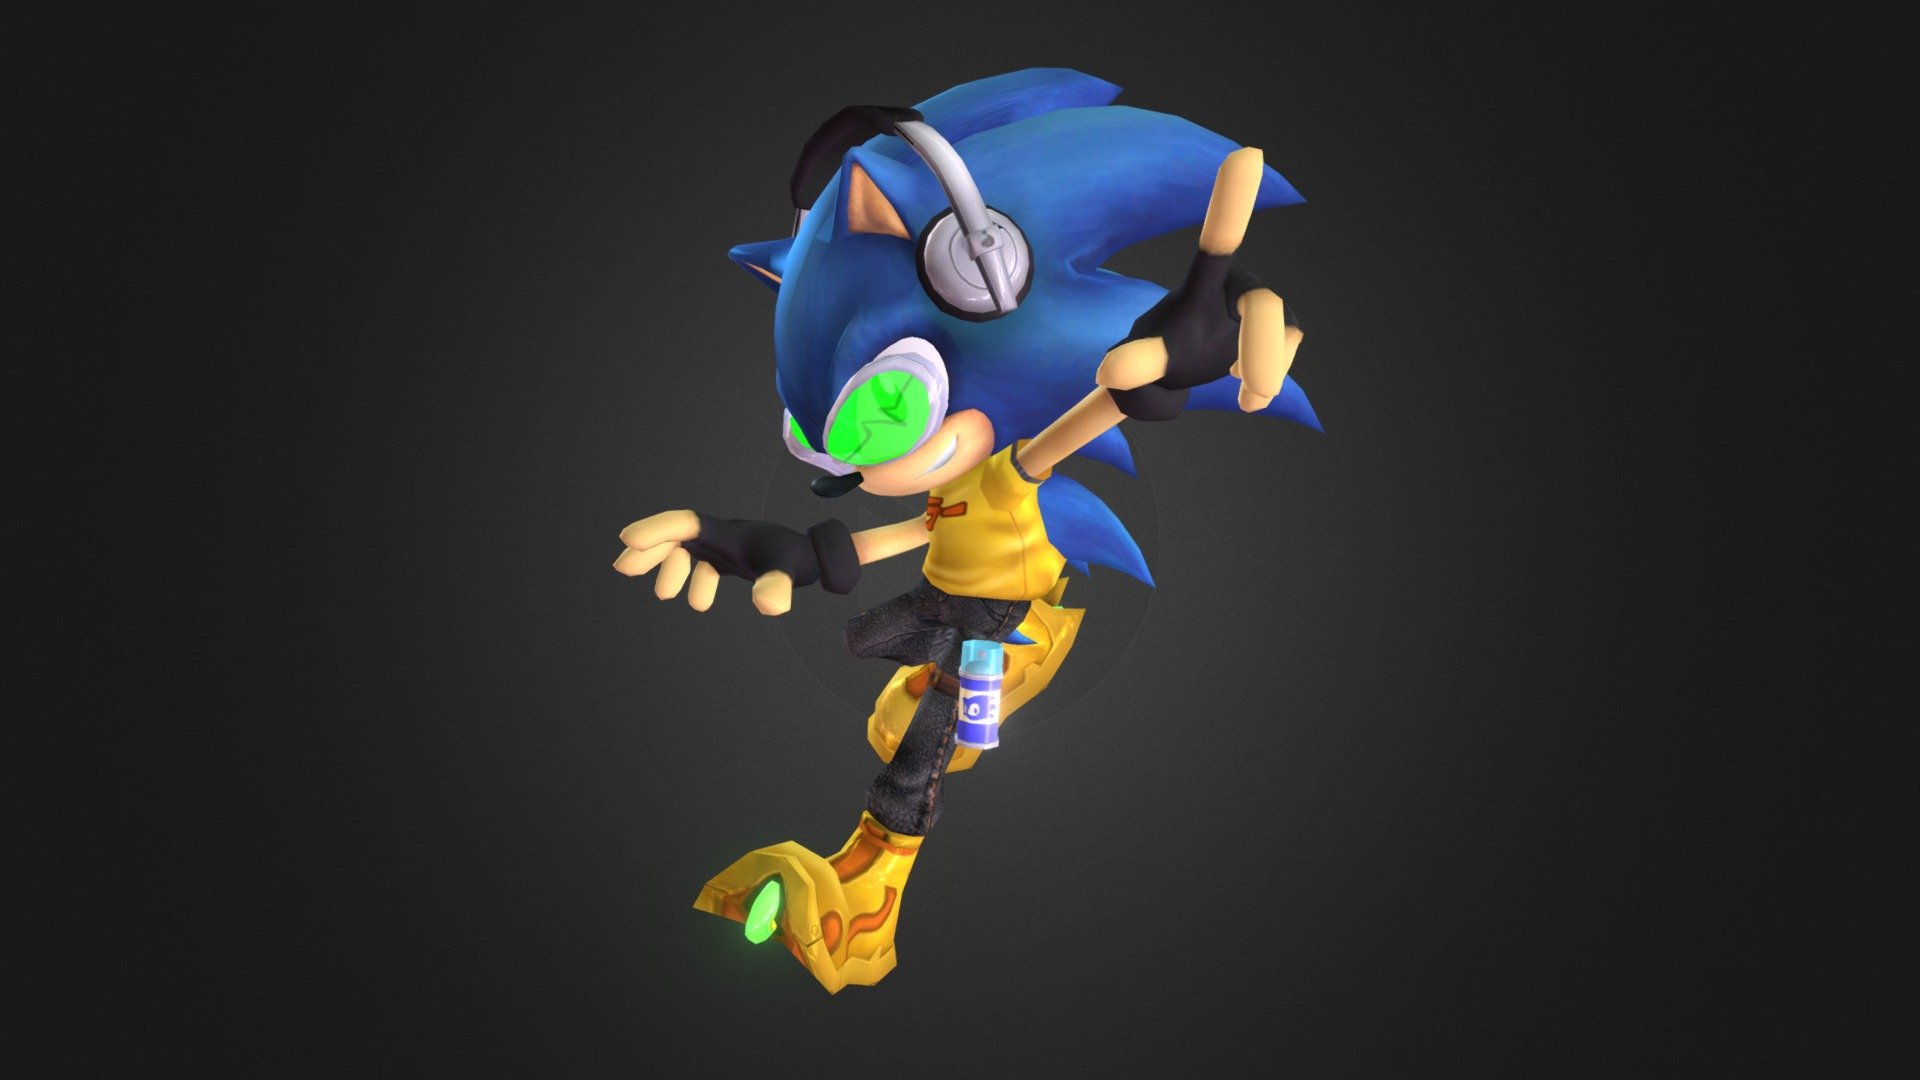 Alternate costume for Sonic in Project M - Jet Set Sonic - Download Free 3D model by projectmgame 3d model